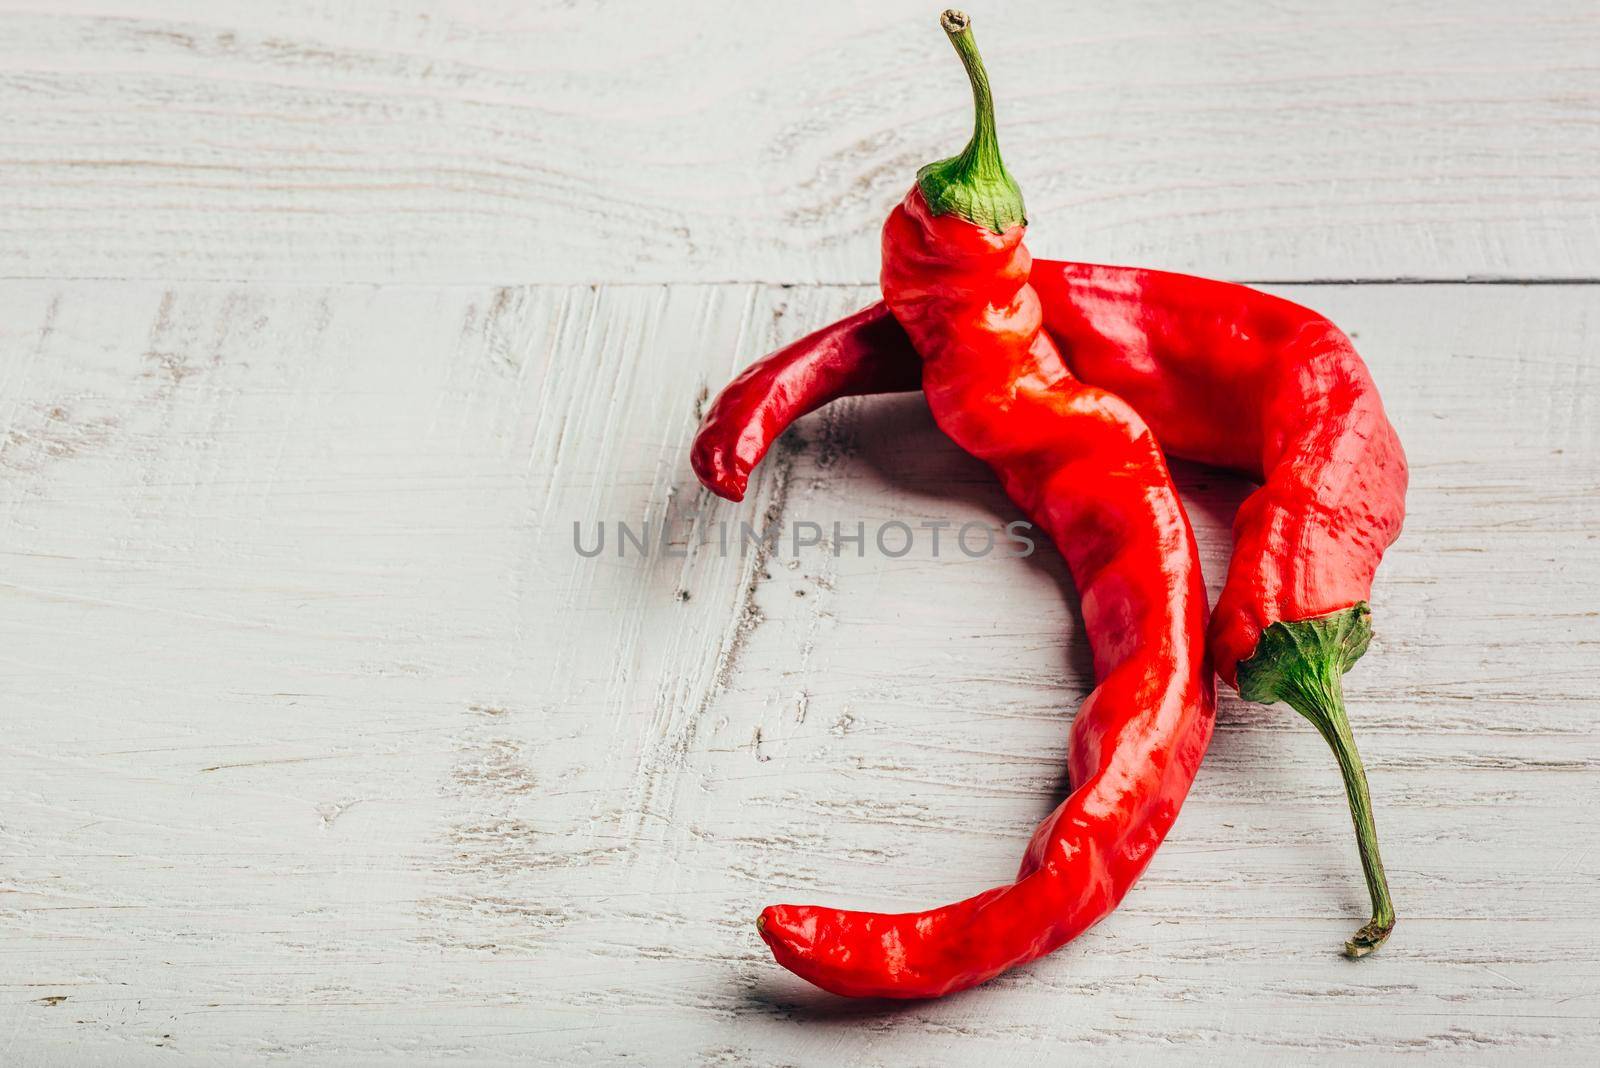 Ripe and red chili peppers over light wooden background.